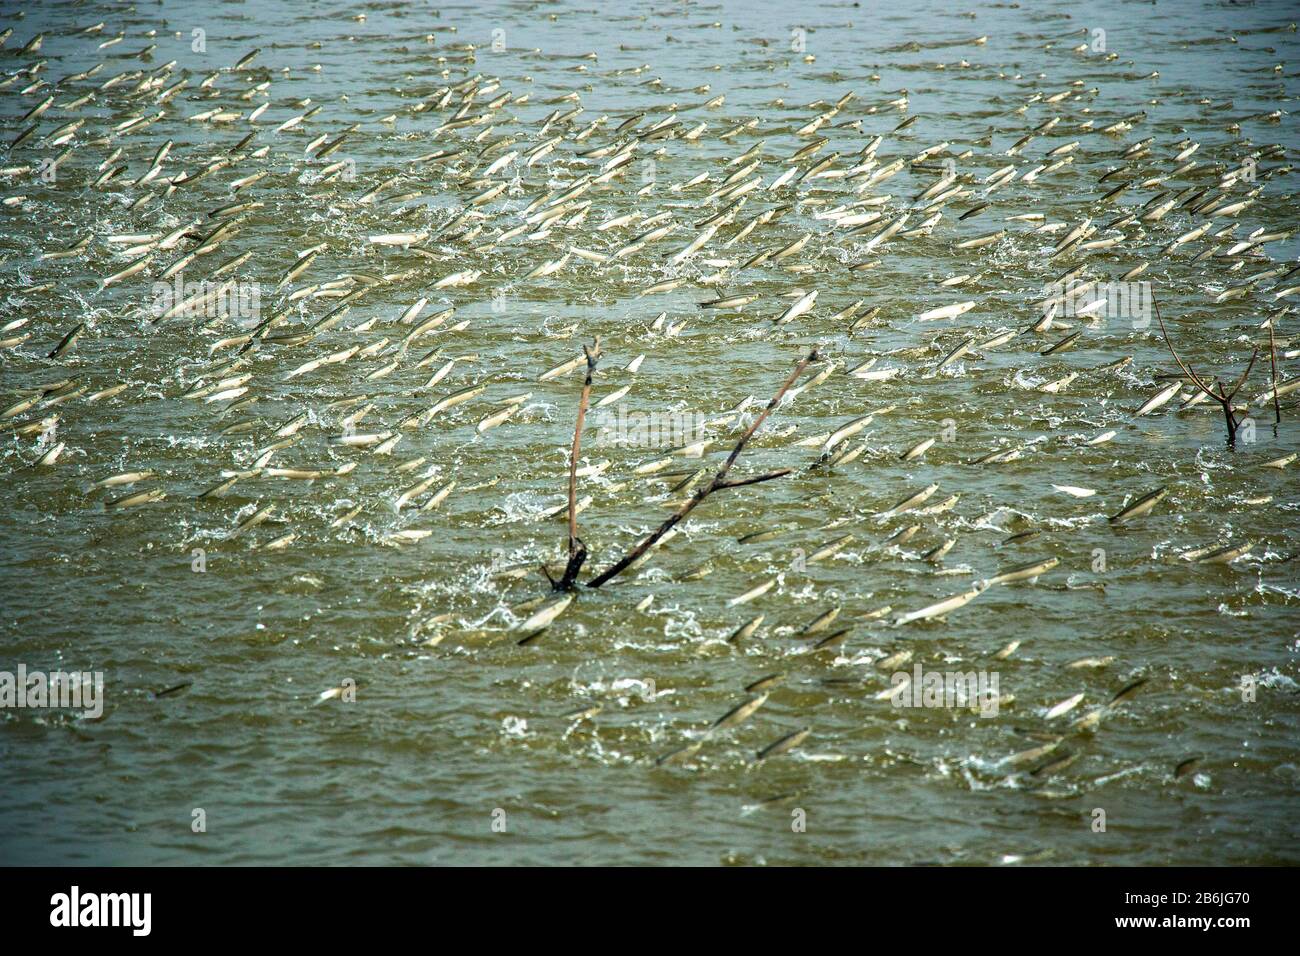 A group of Mullet fish is jumping out of the water from a pond. The fish play a very important role to aerate the pond and enriching the water with oxygen. Stock Photo